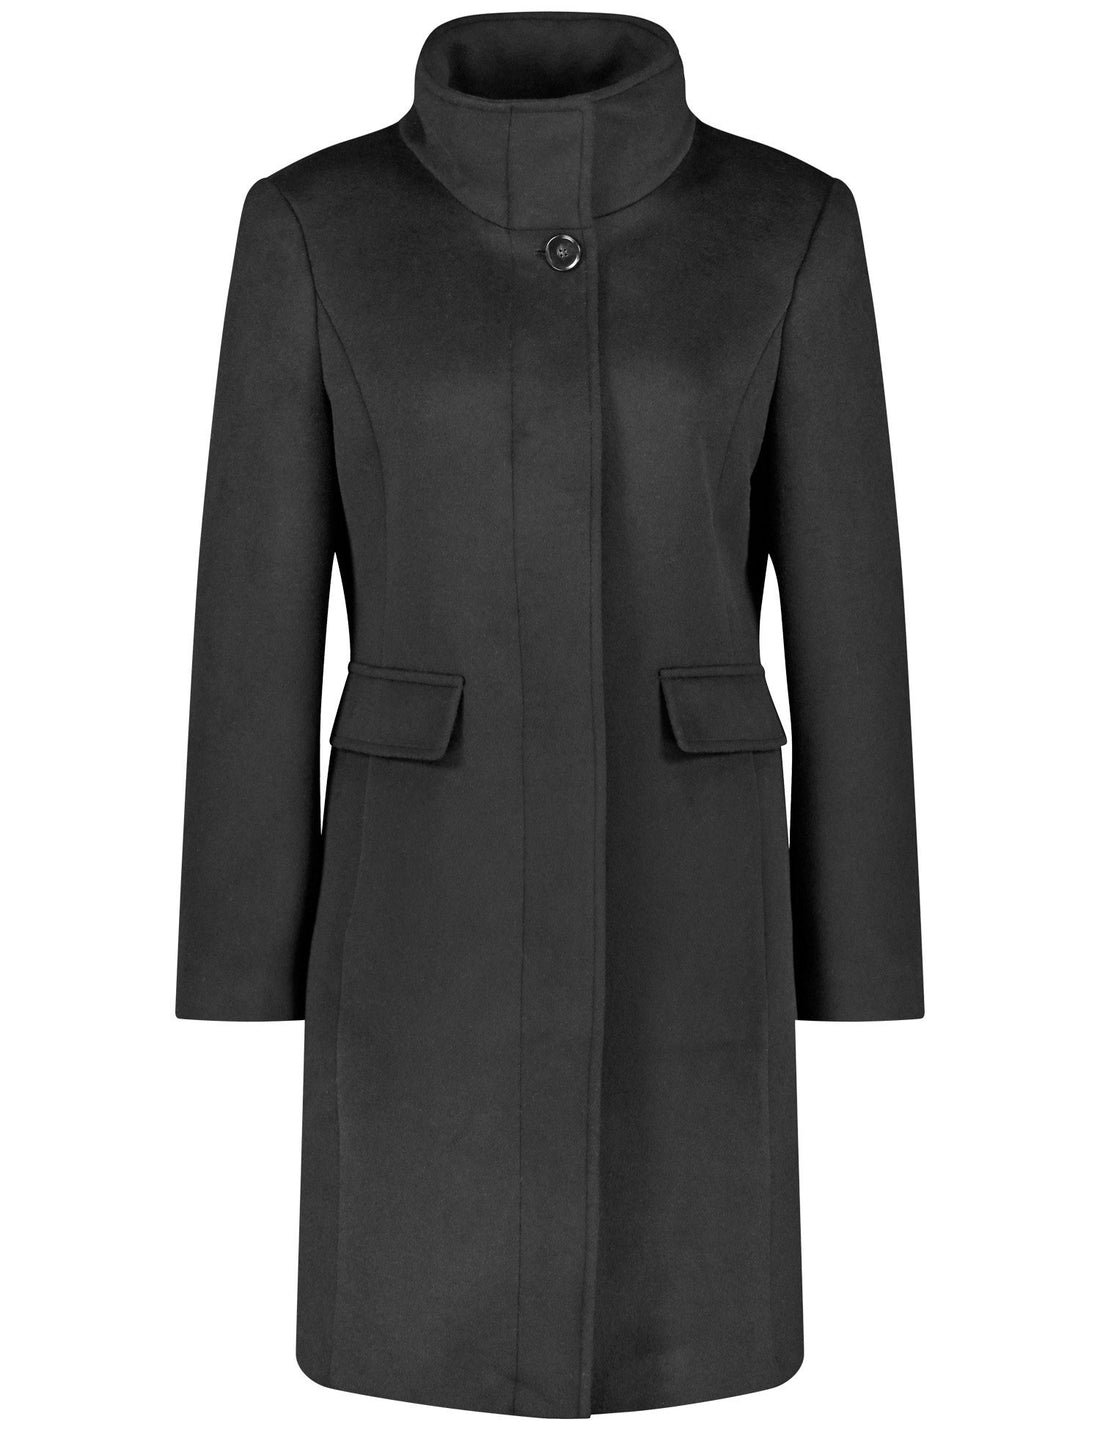 Short Wool Coat With A Stand Up Collar_250235-31131_11000_02